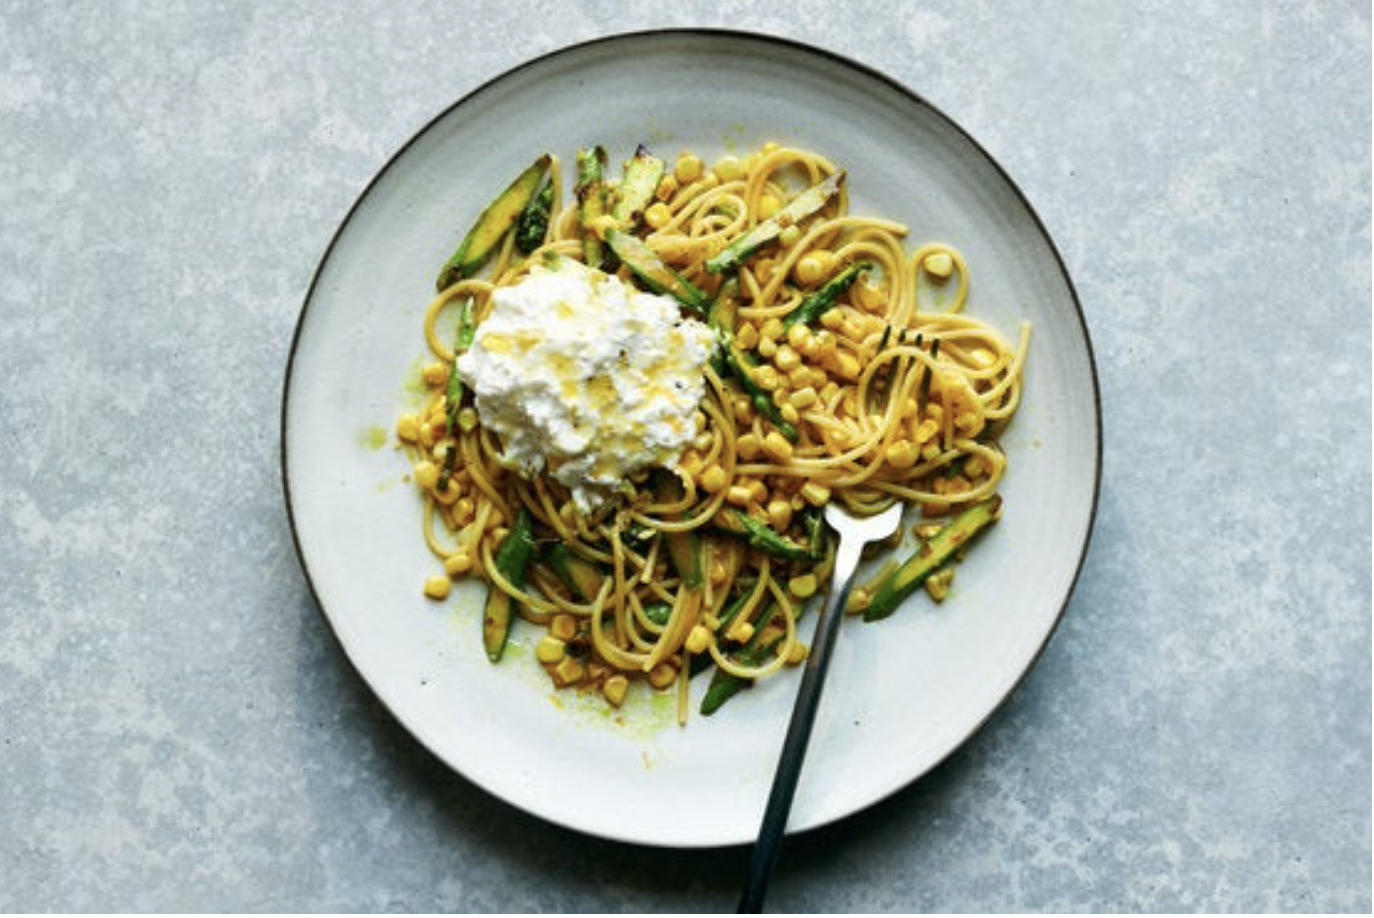 Caramelized corn and asparagus pasta with ricotta cheese in a serving dish